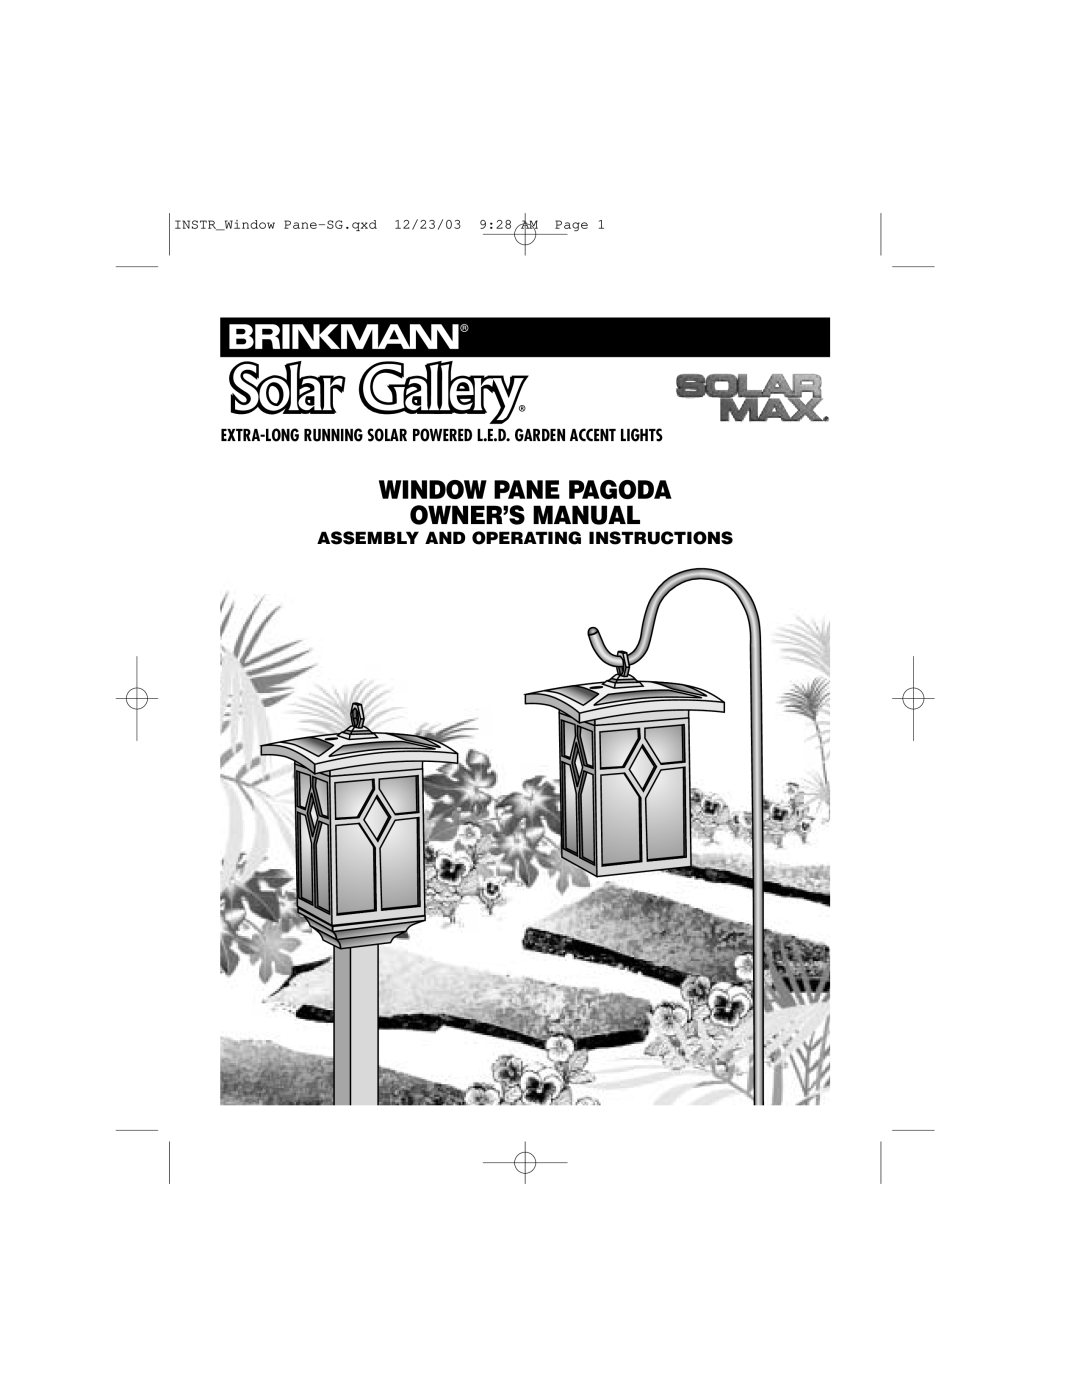 Brinkmann 822-2509-2 owner manual INSTRWindow Pane-SG.qxd 12/23/03 928 AM Page, Assembly And Operating Instructions 